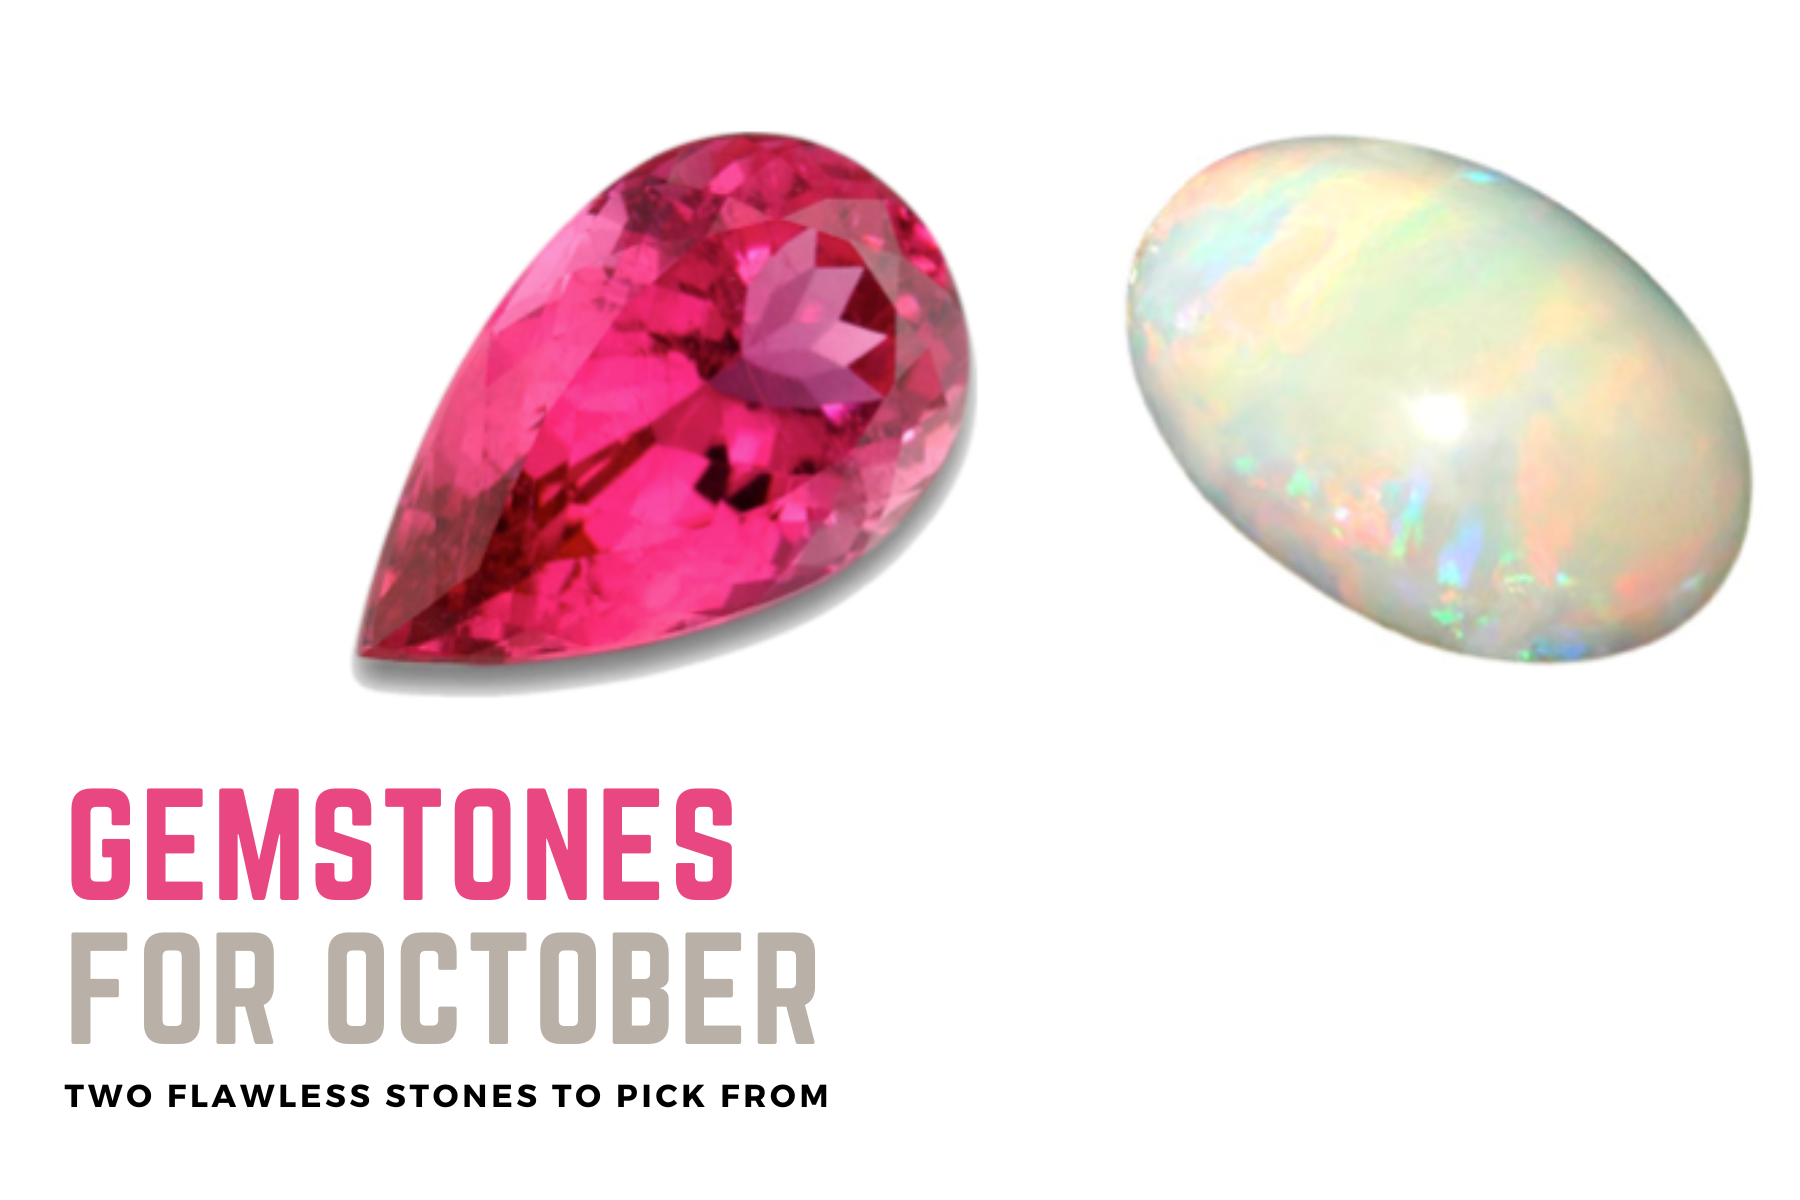 Gemstones For October - Two Flawless Stones To Pick From